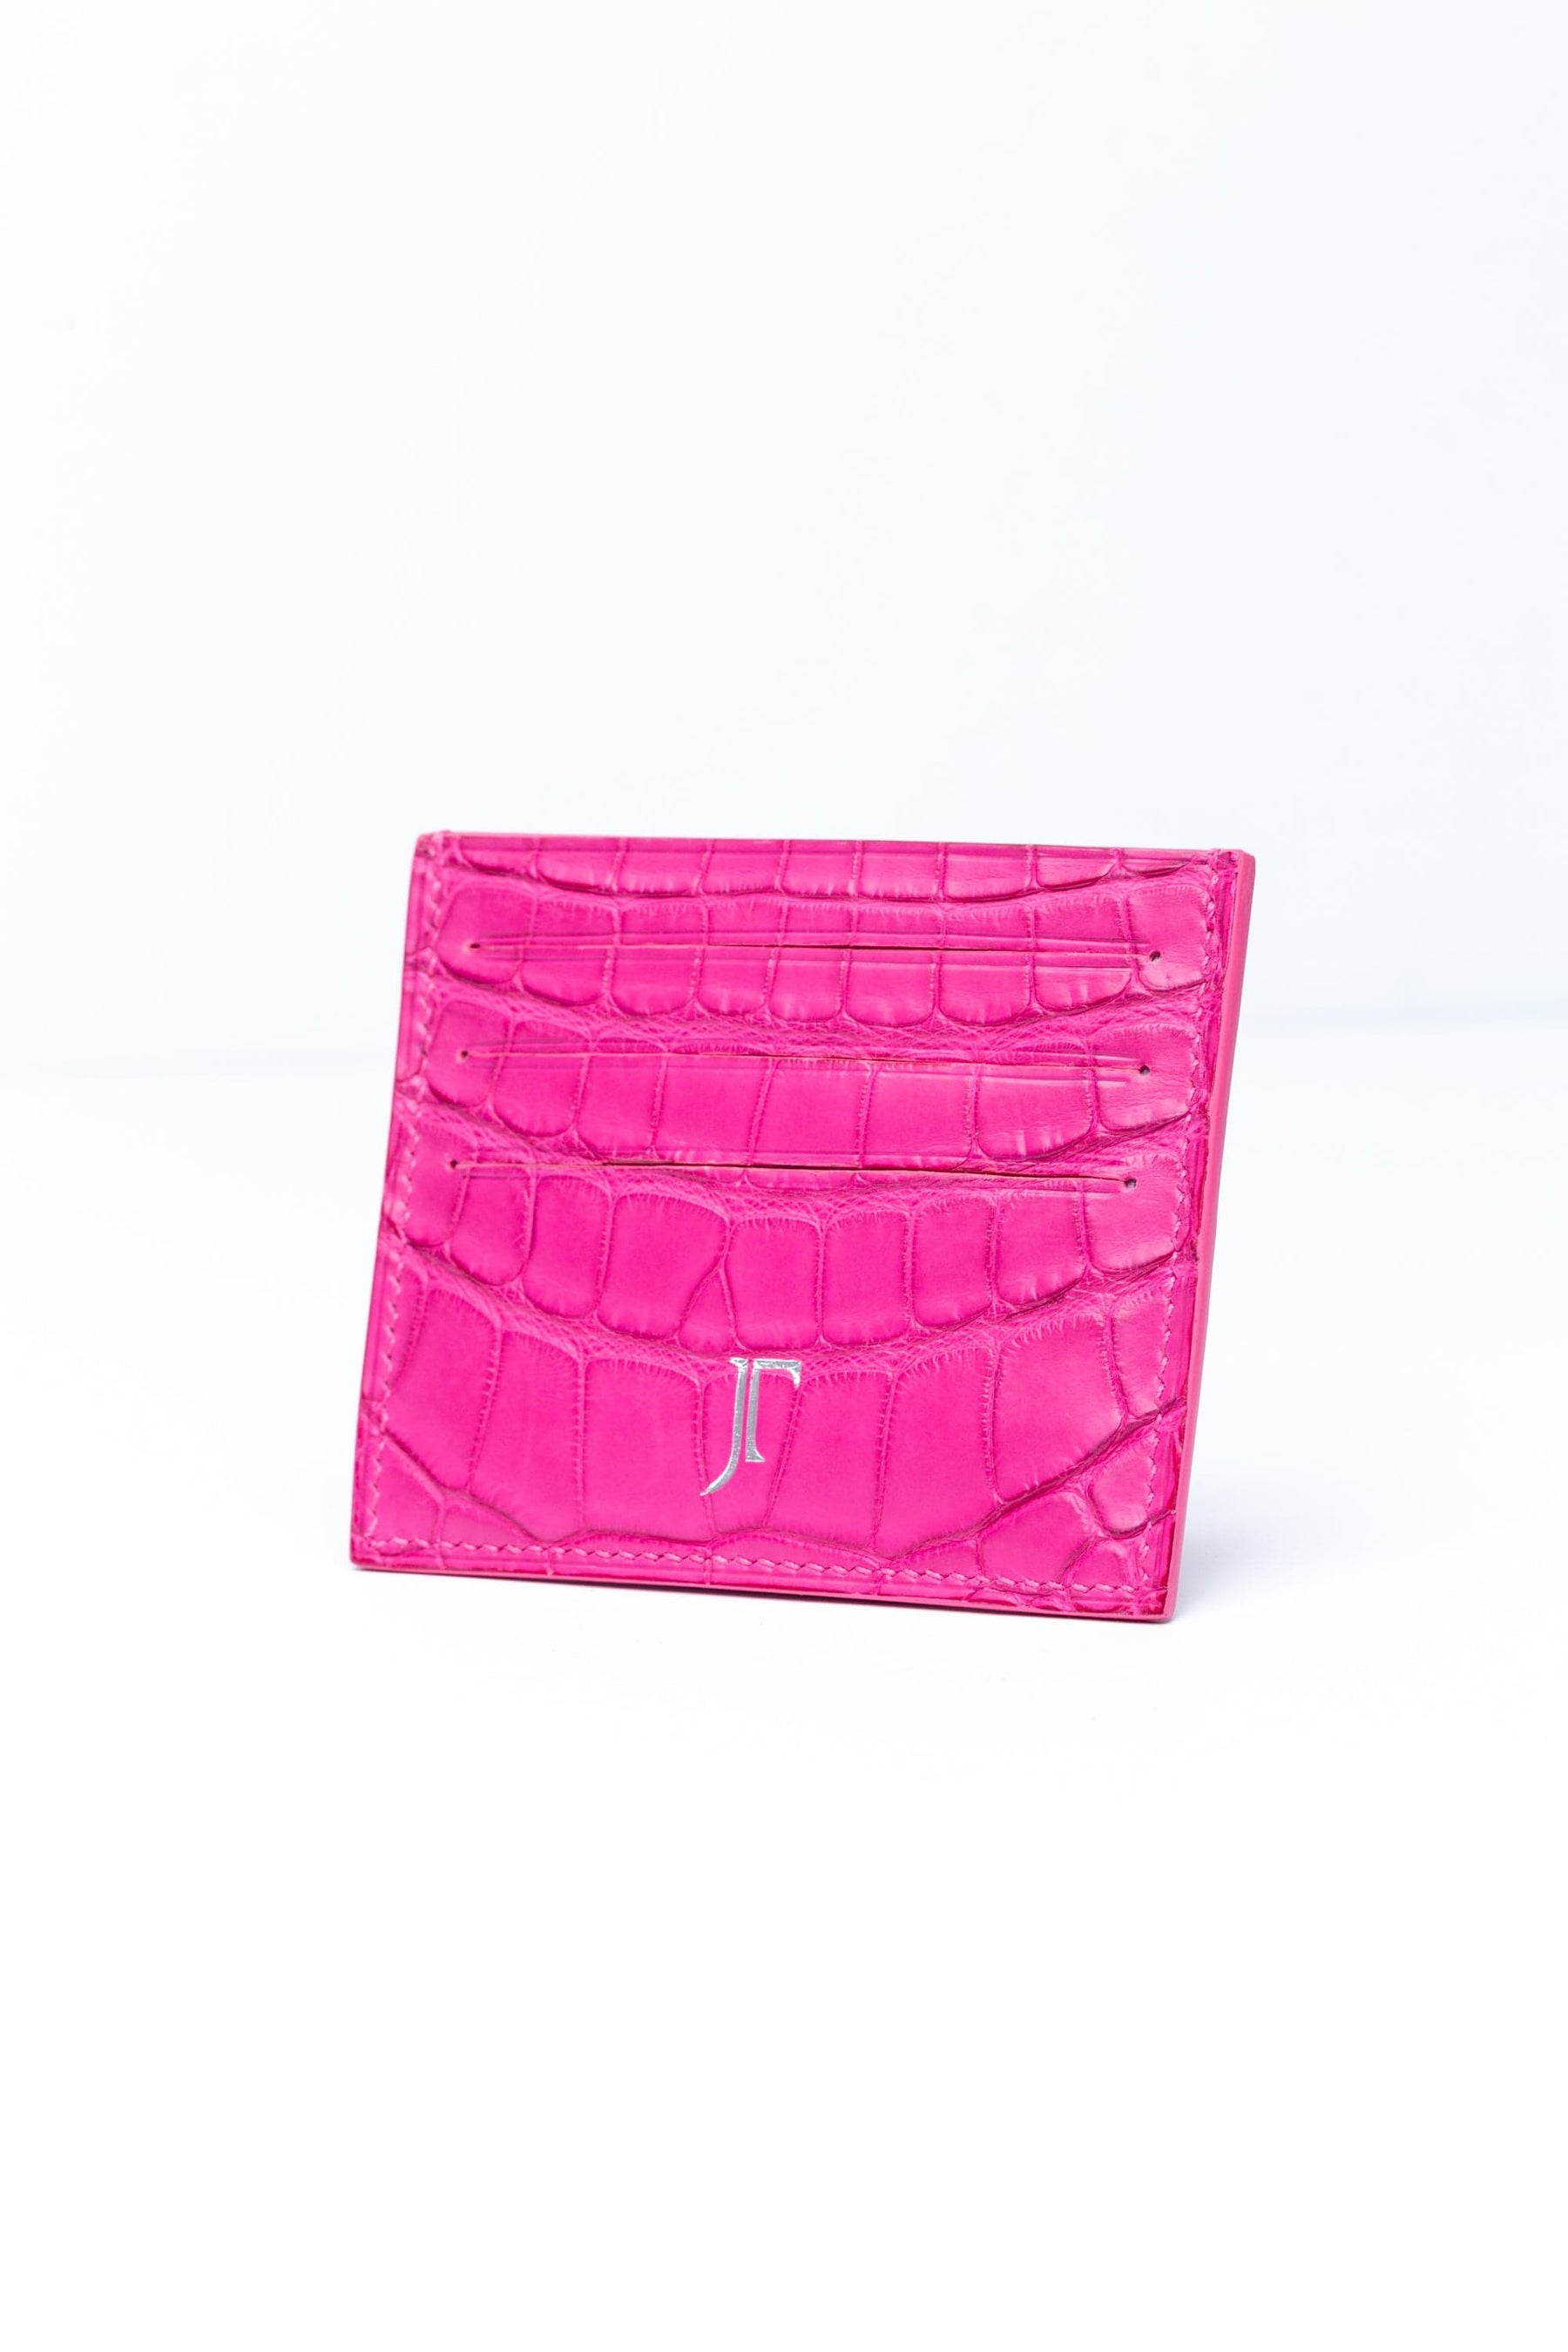 Tamagini Leather | The Wallet Card Endicott Bungus Pink - Hot Edition